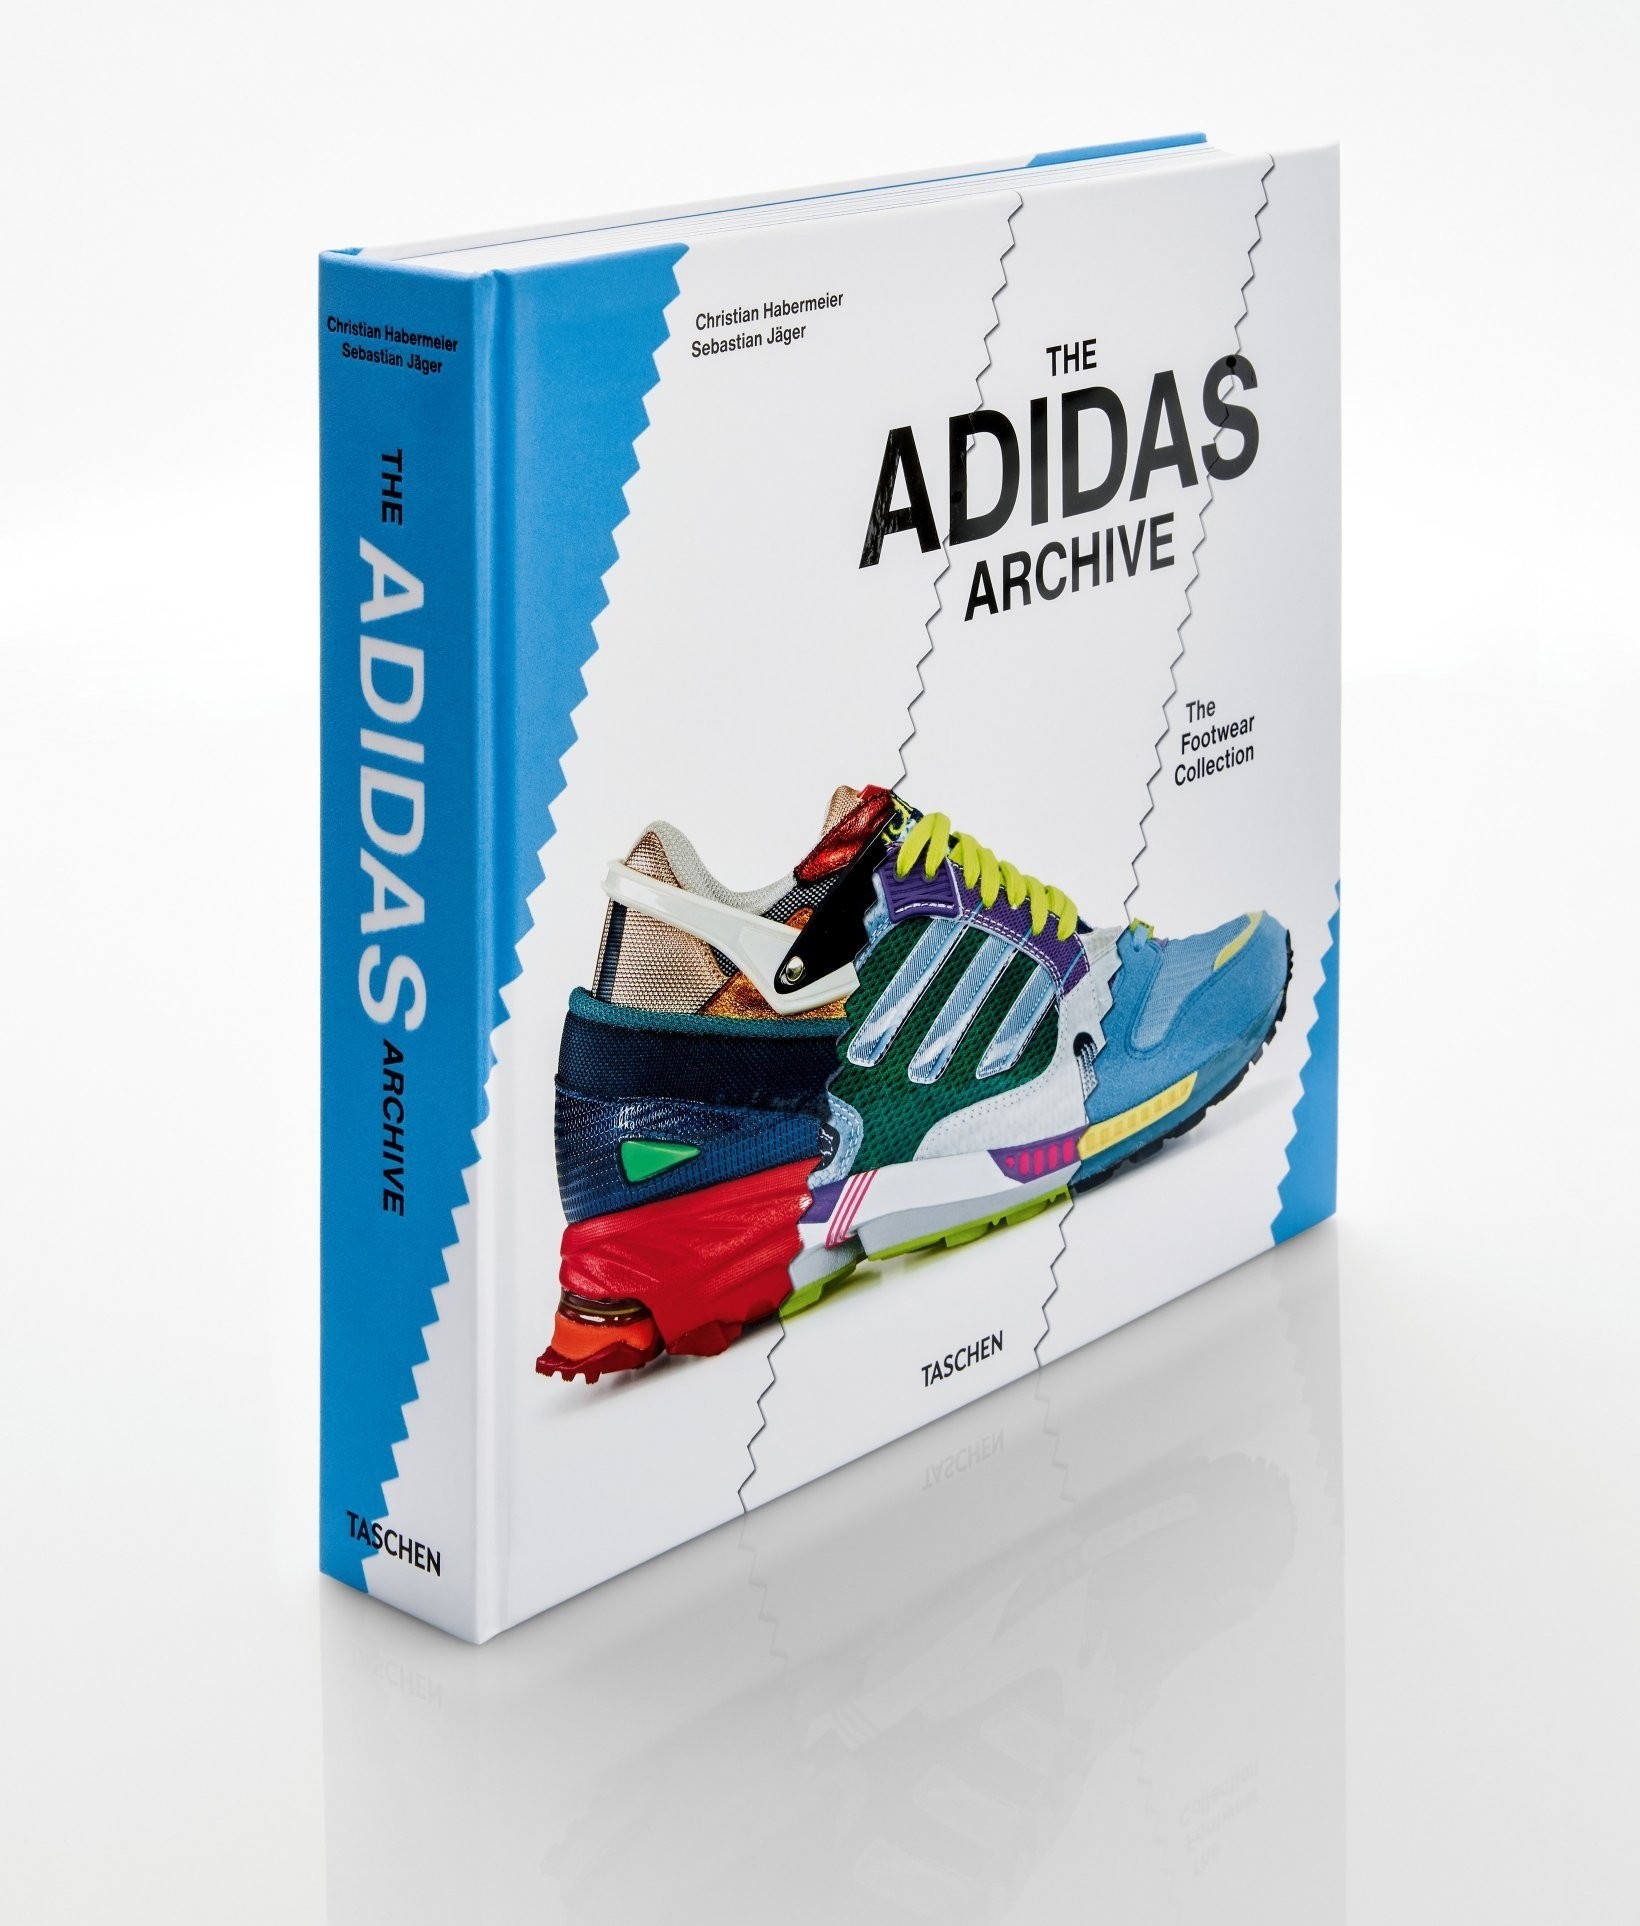 lluvia construir Responder The Adidas Archive. The Footwear Collection Book